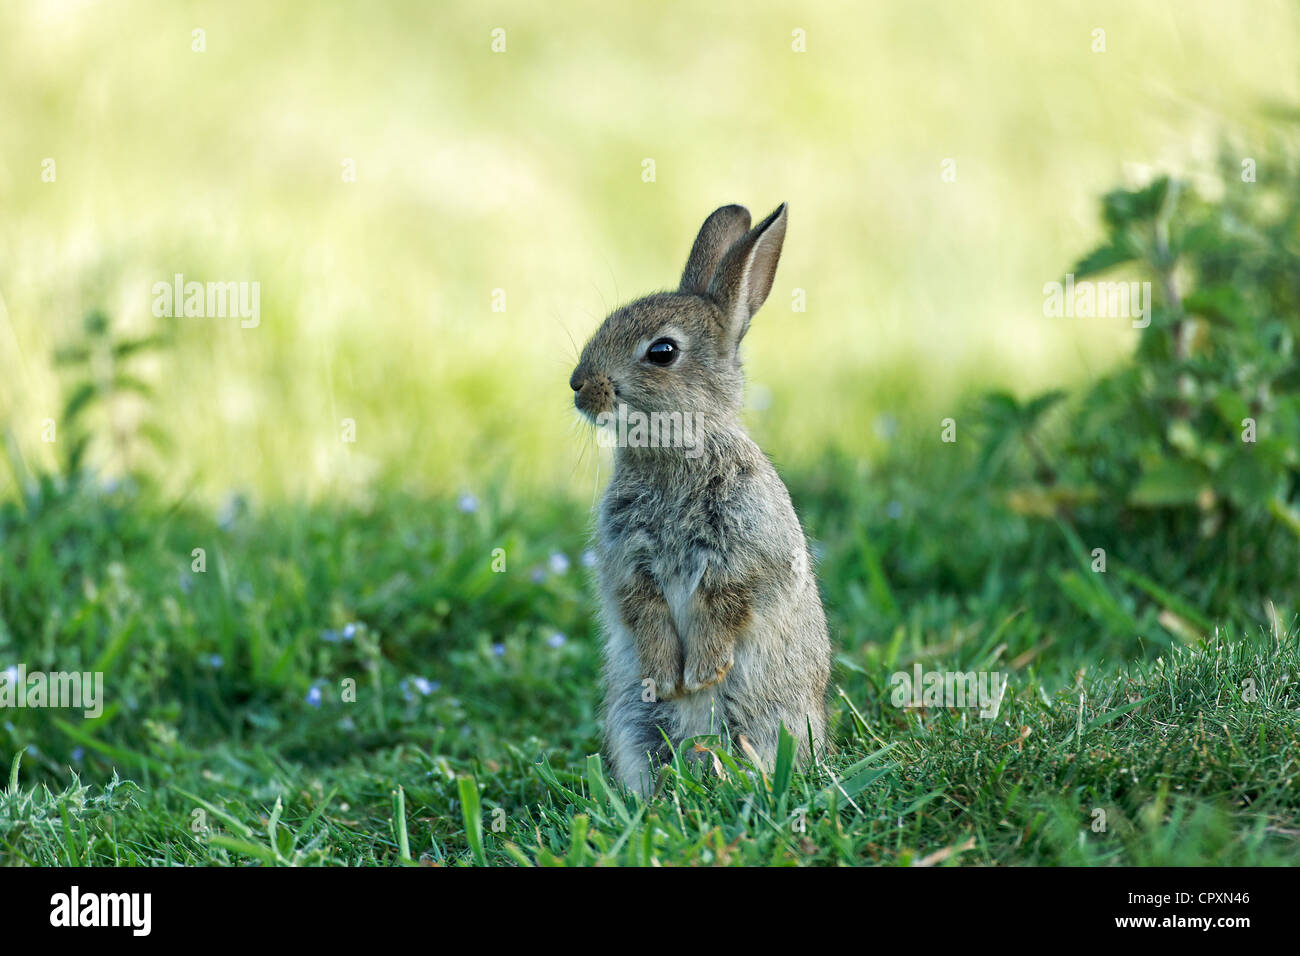 Rabbit, Oryctolagus cuniculus, single young mammal in grass, Warwickshire, May 2012 Stock Photo